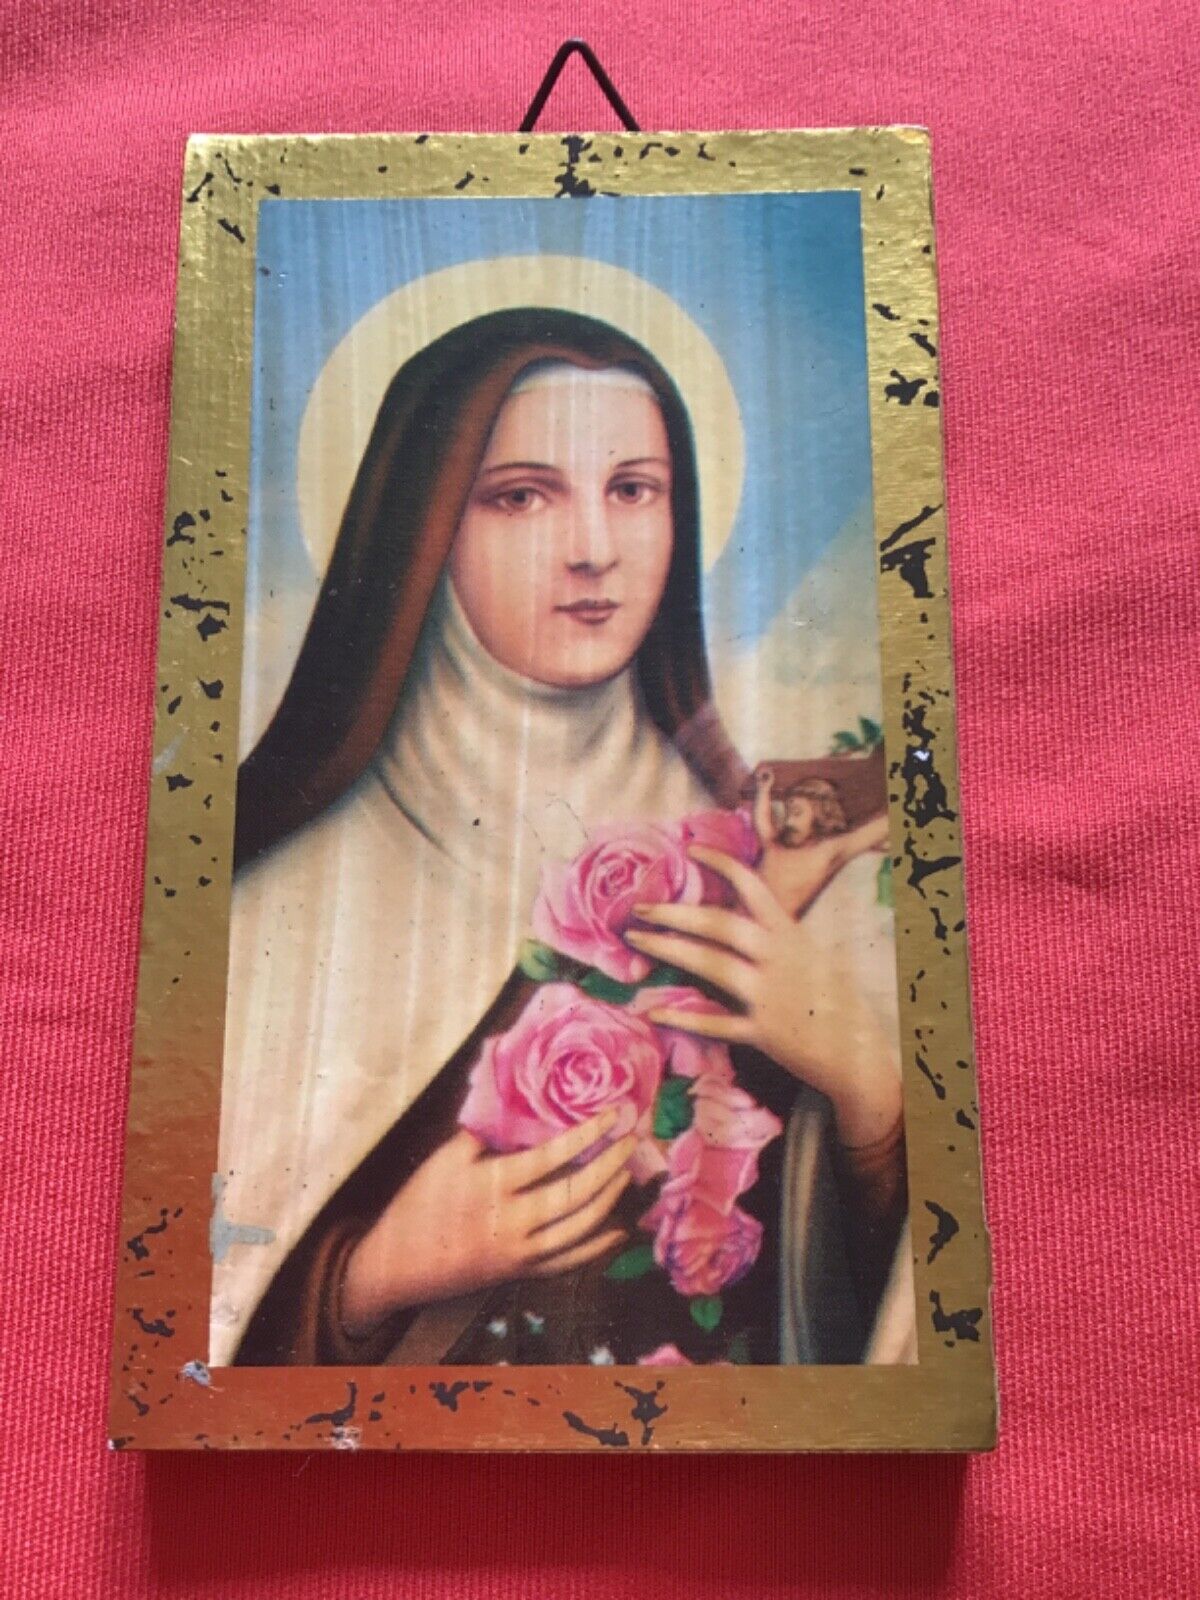 Rare relic of St. Therese of the Child Jesus from the clothes wonderful colors